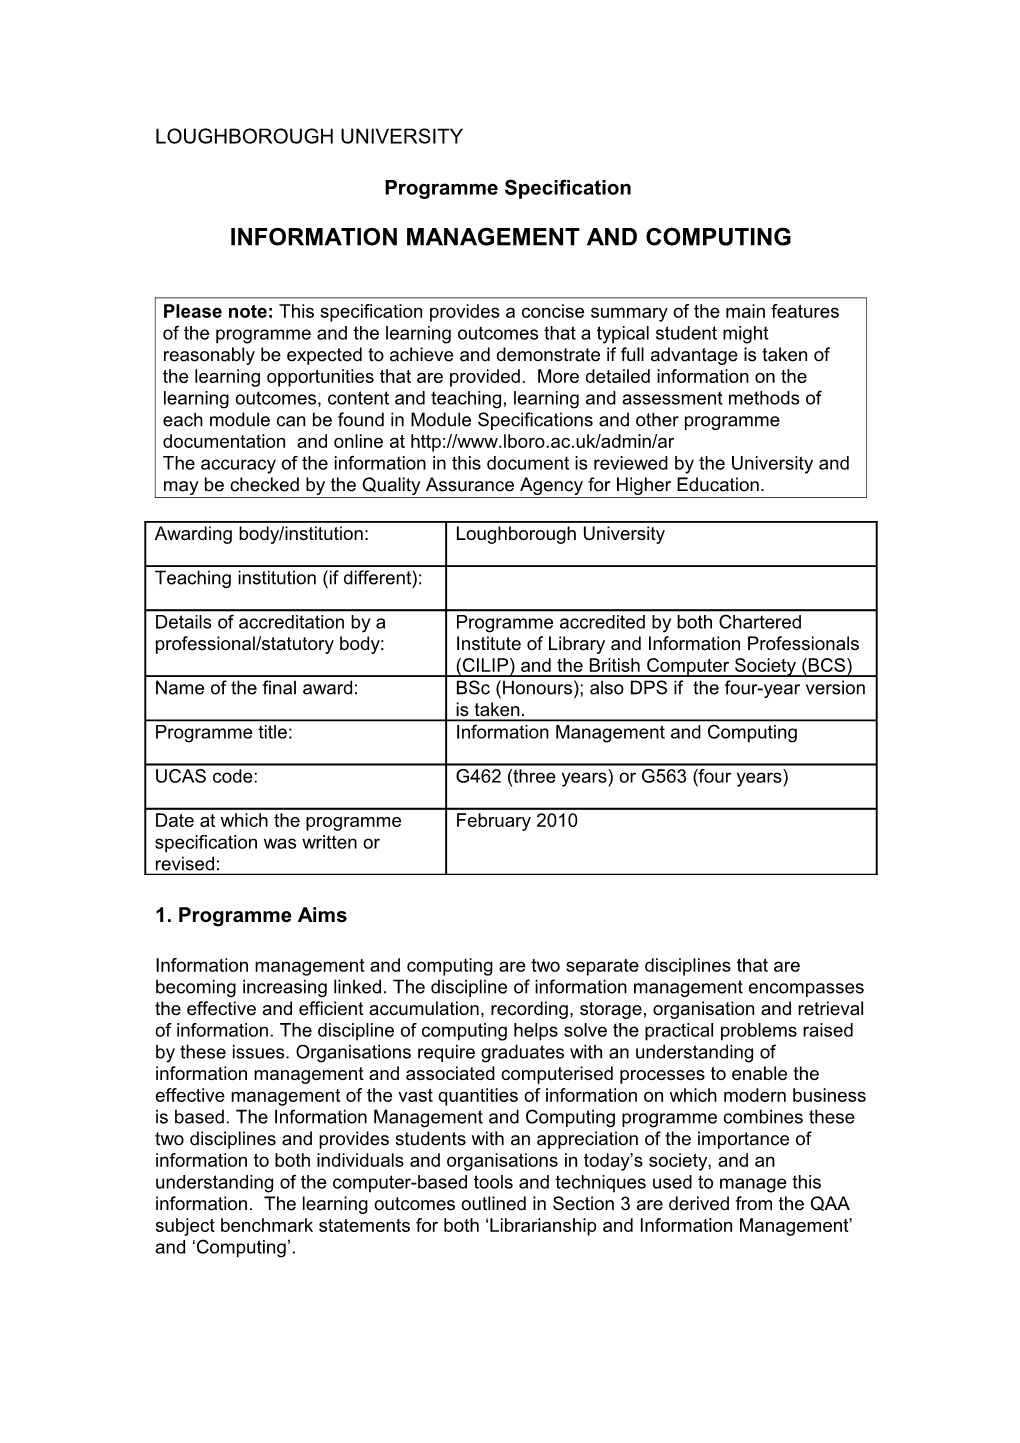 Information Management and Computing